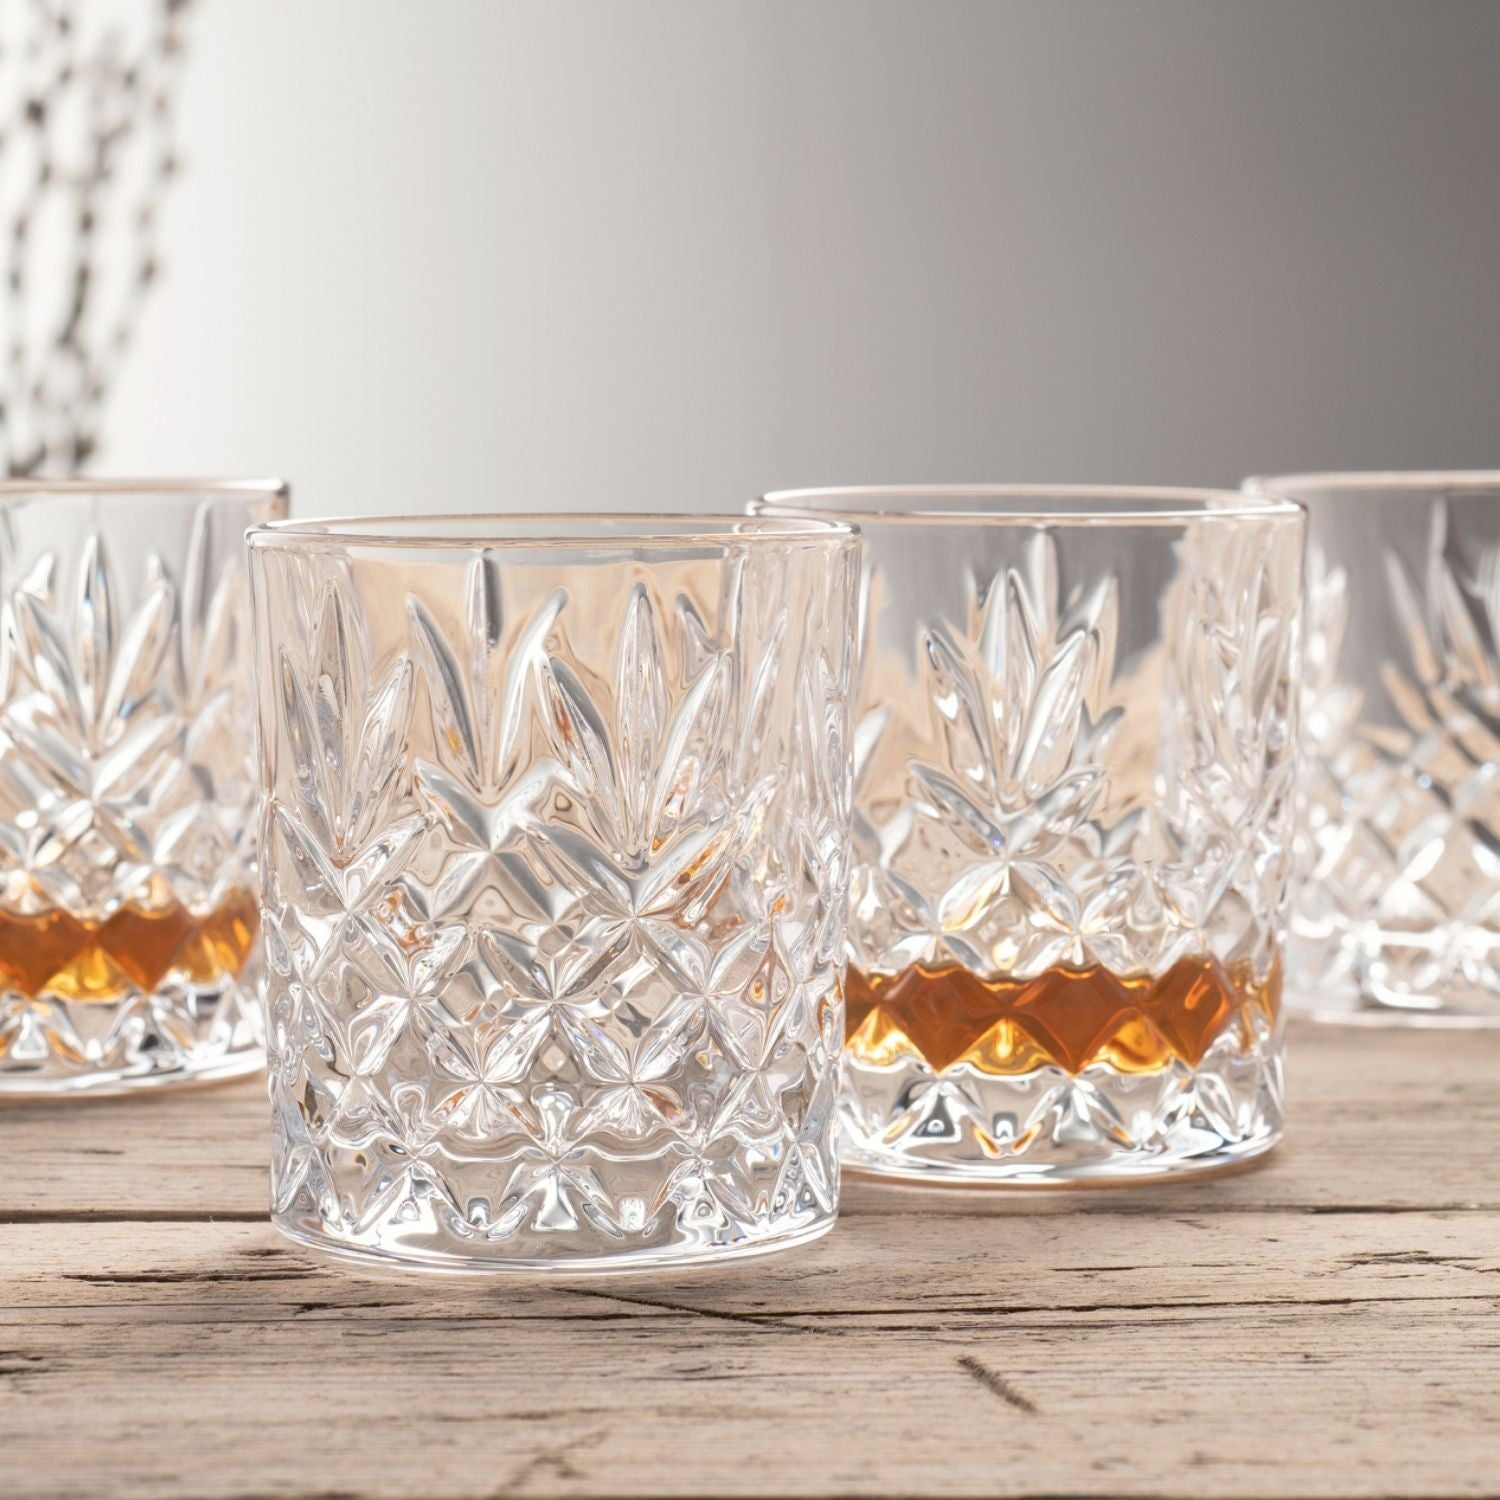 Galway Crystal Galway Crystal Renmore Set of 4 Whiskey Glasses 2 Shaws Department Stores